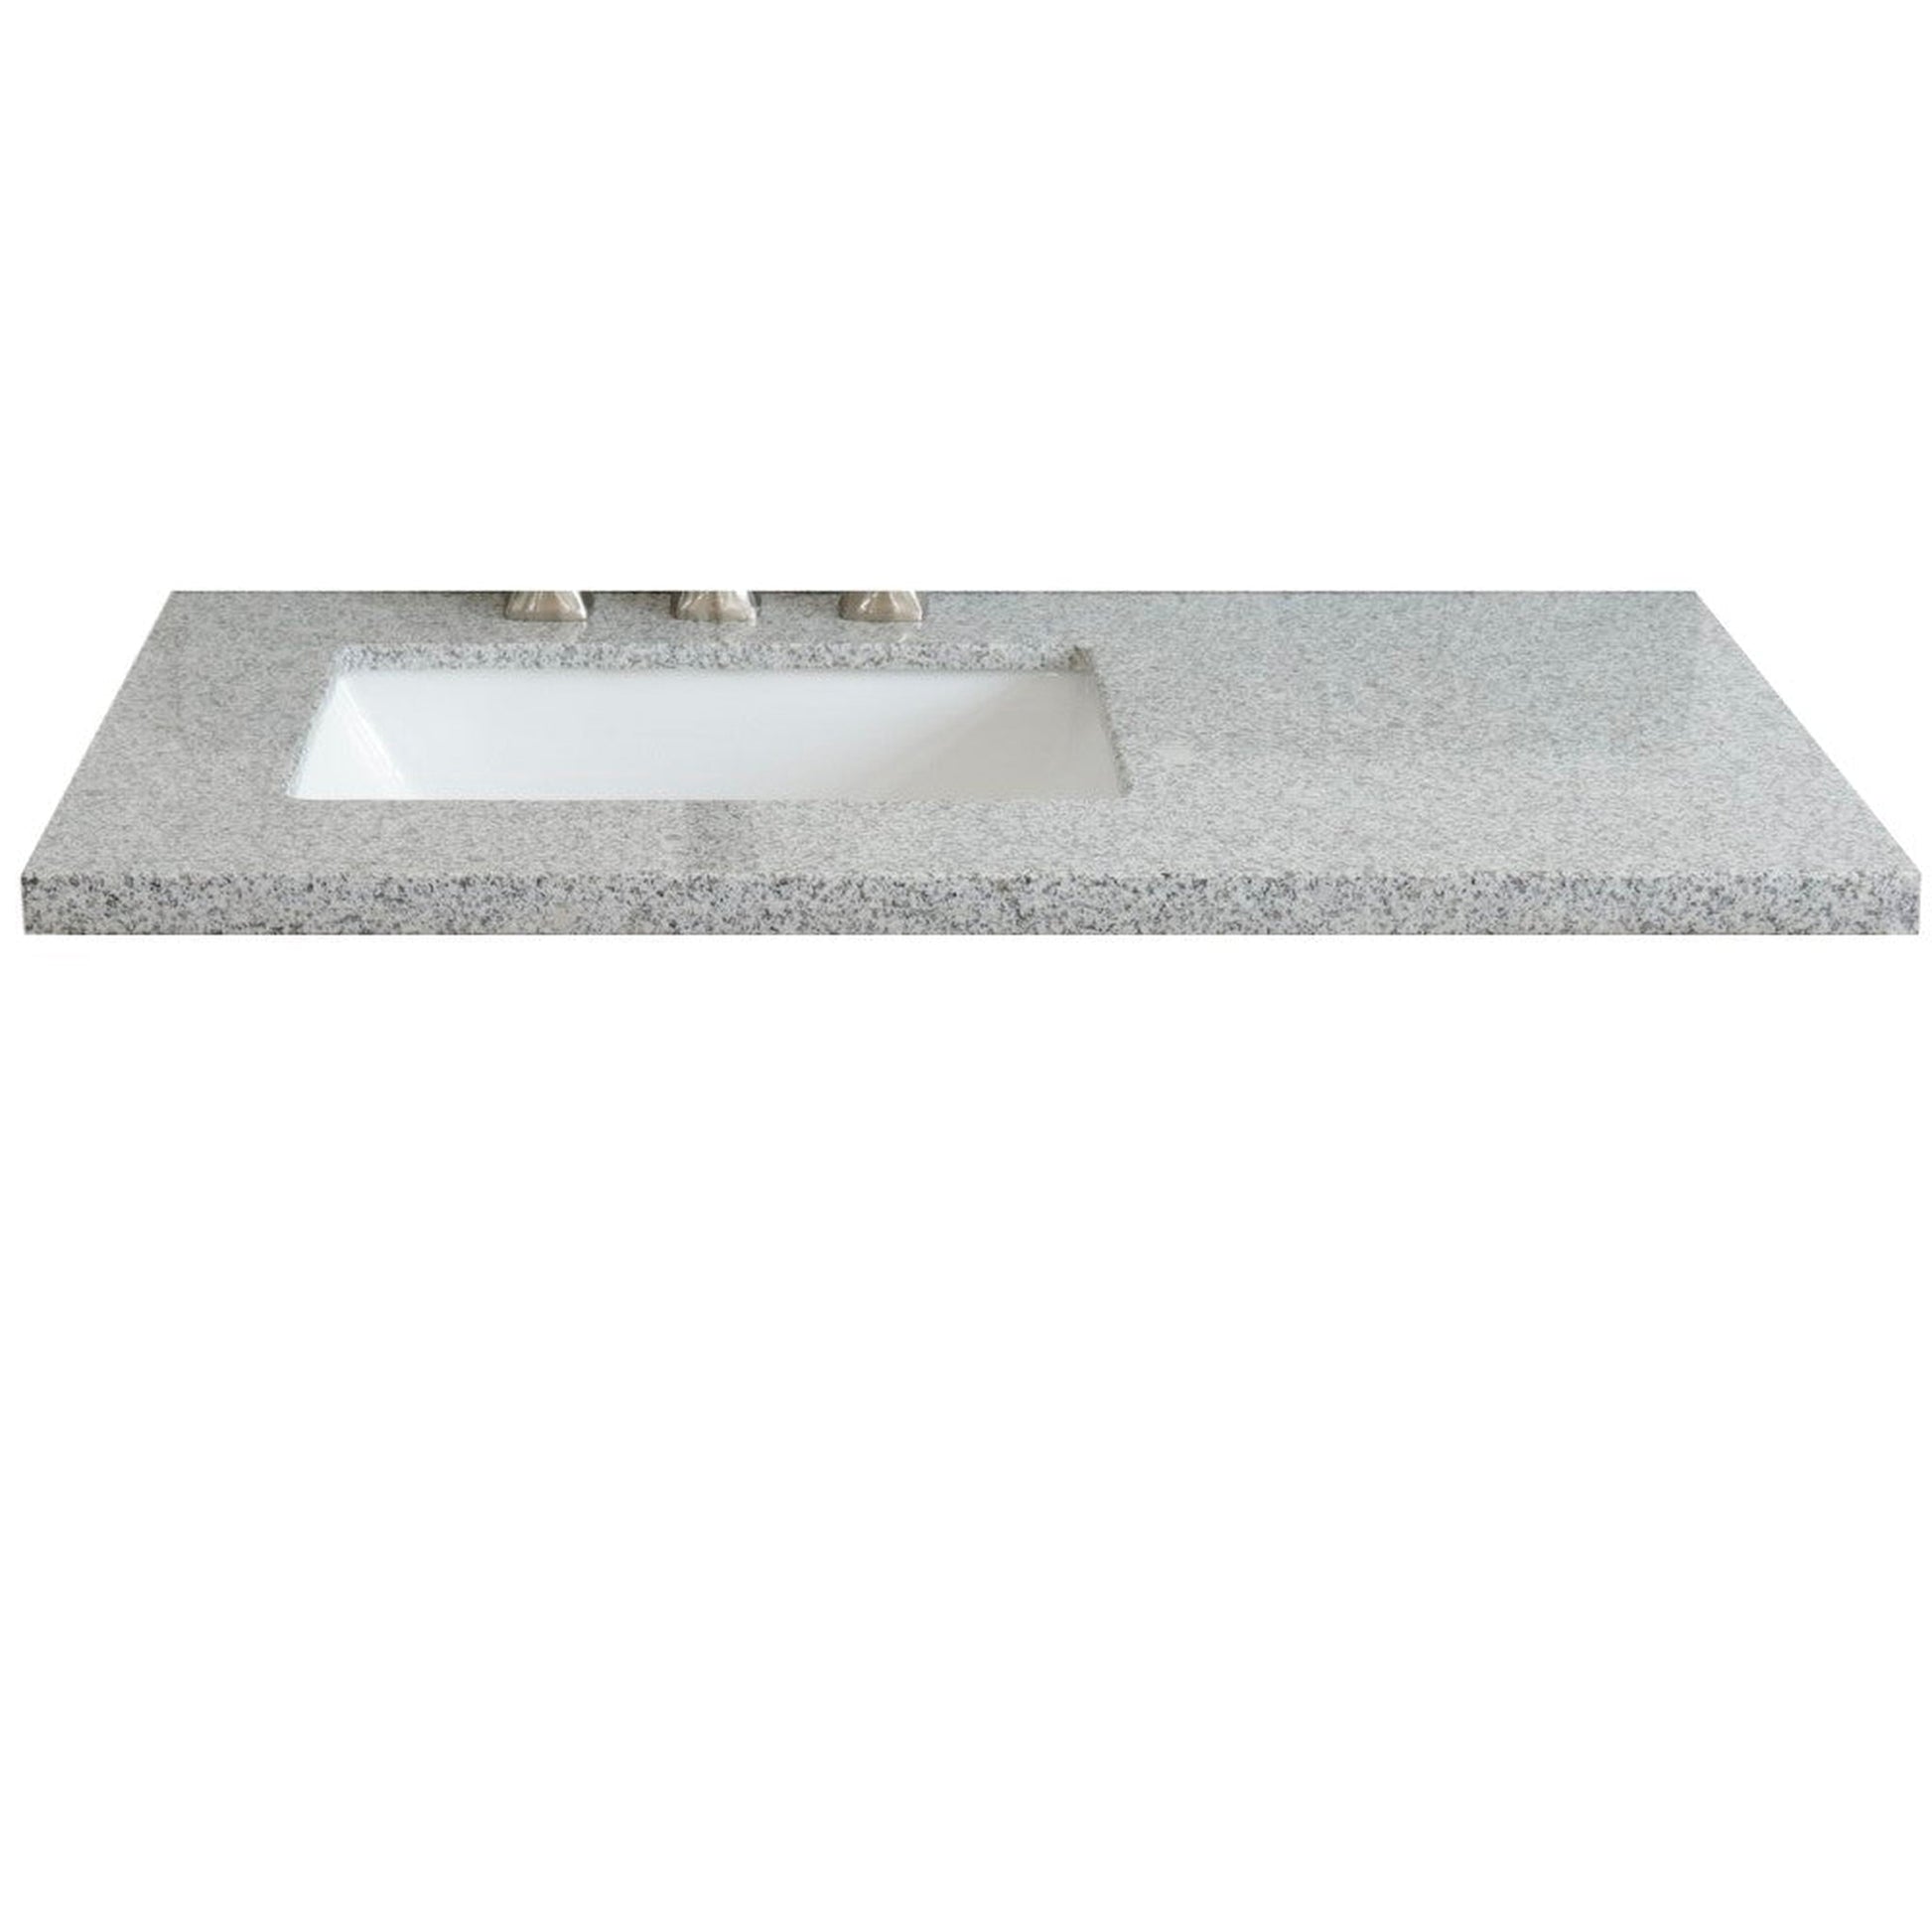 Bellaterra Home 37" x 22" Gray Granite Three Hole Vanity Top With Left Offset Undermount Rectangular Sink and Overflow